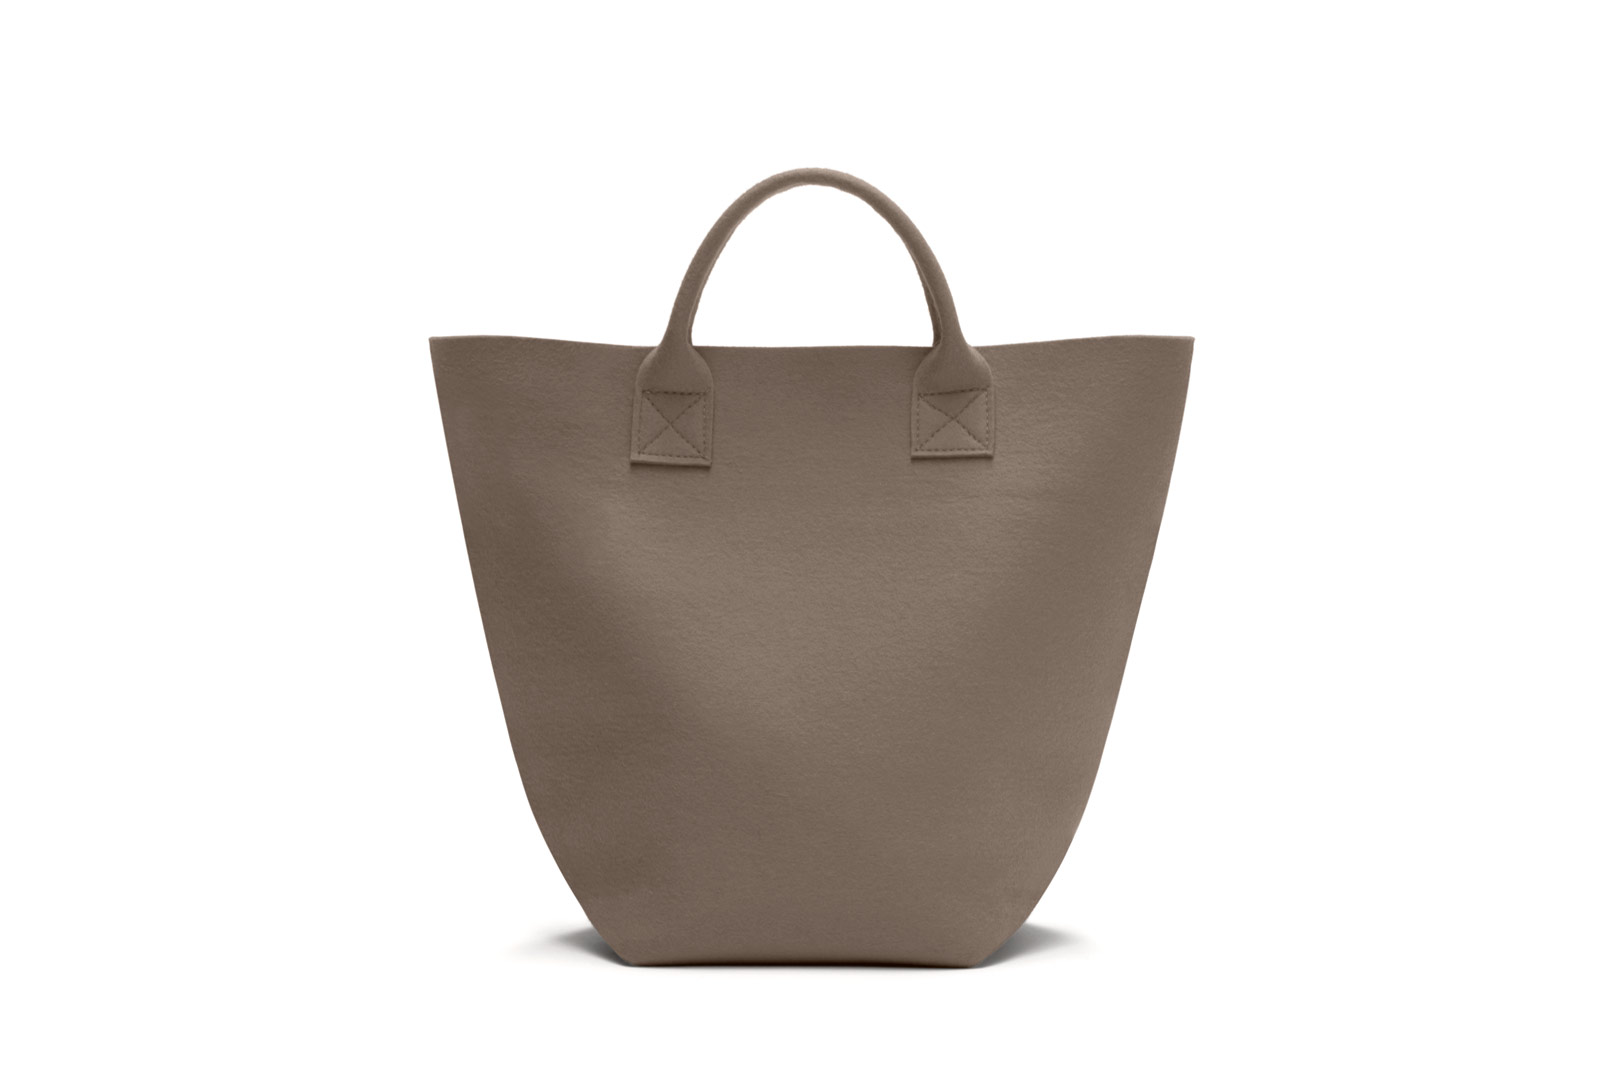 HEY-Sign Filztasche Carry in der Farbe "Taupe"